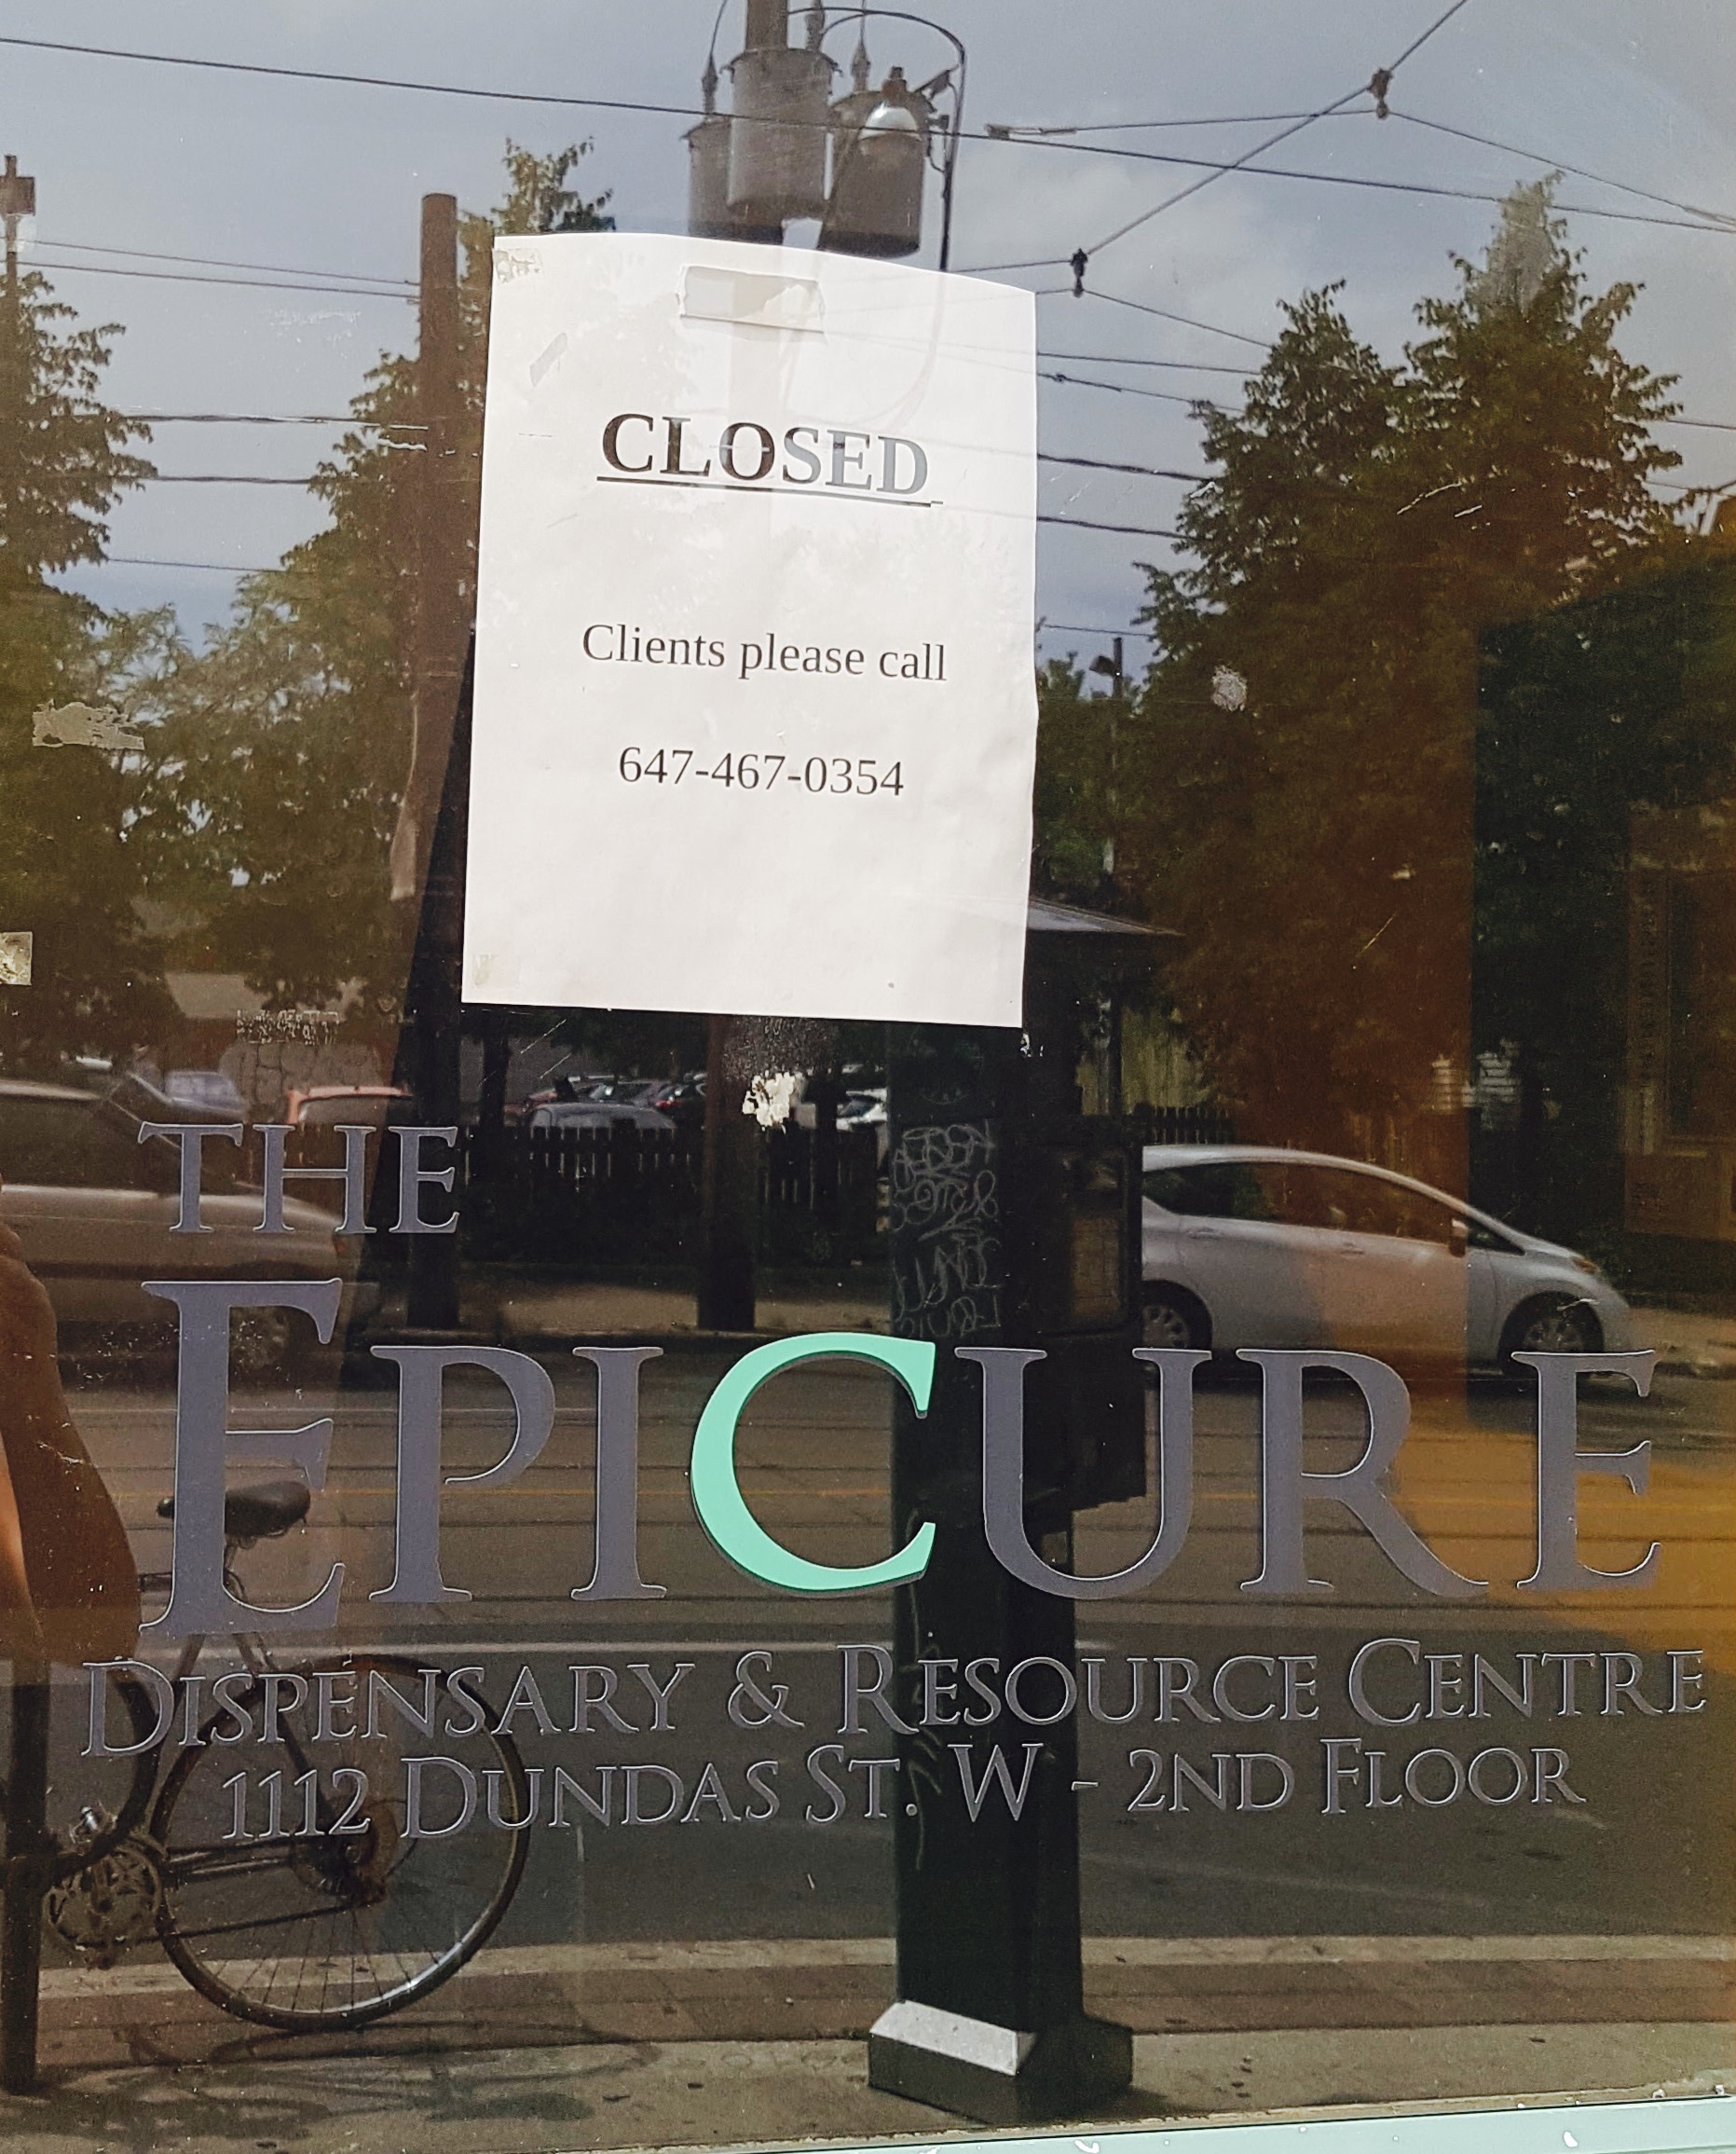 Epicure Closed sign